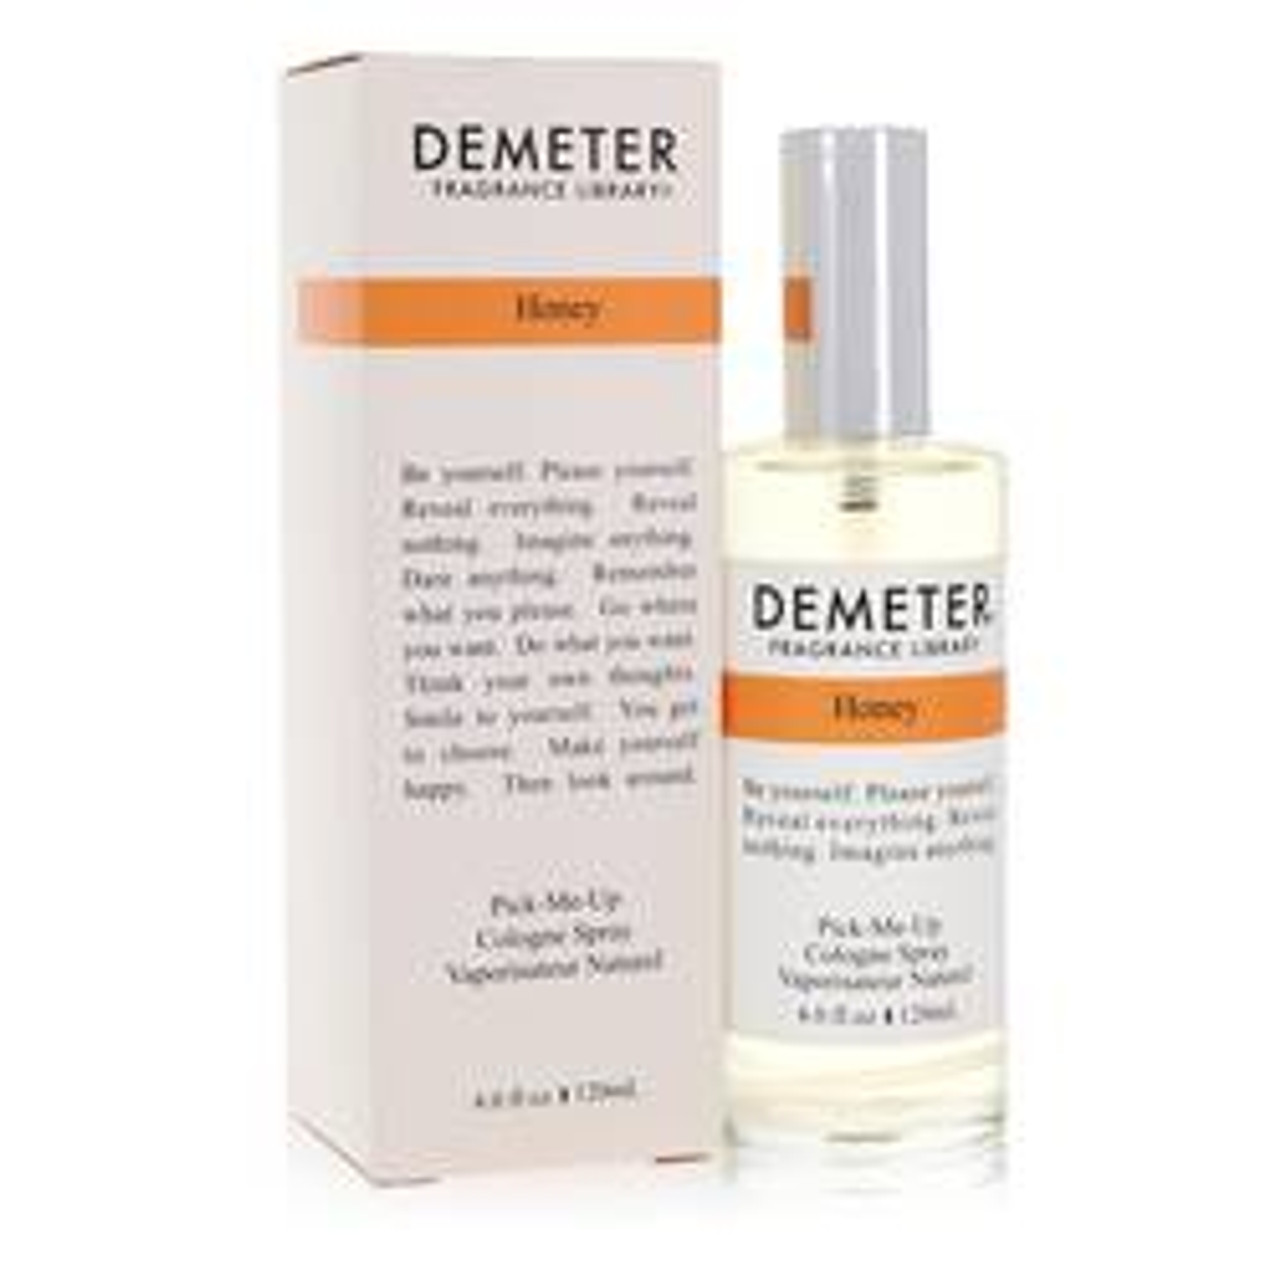 Demeter Honey Perfume By Demeter Cologne Spray 4 oz for Women - [From 79.50 - Choose pk Qty ] - *Ships from Miami